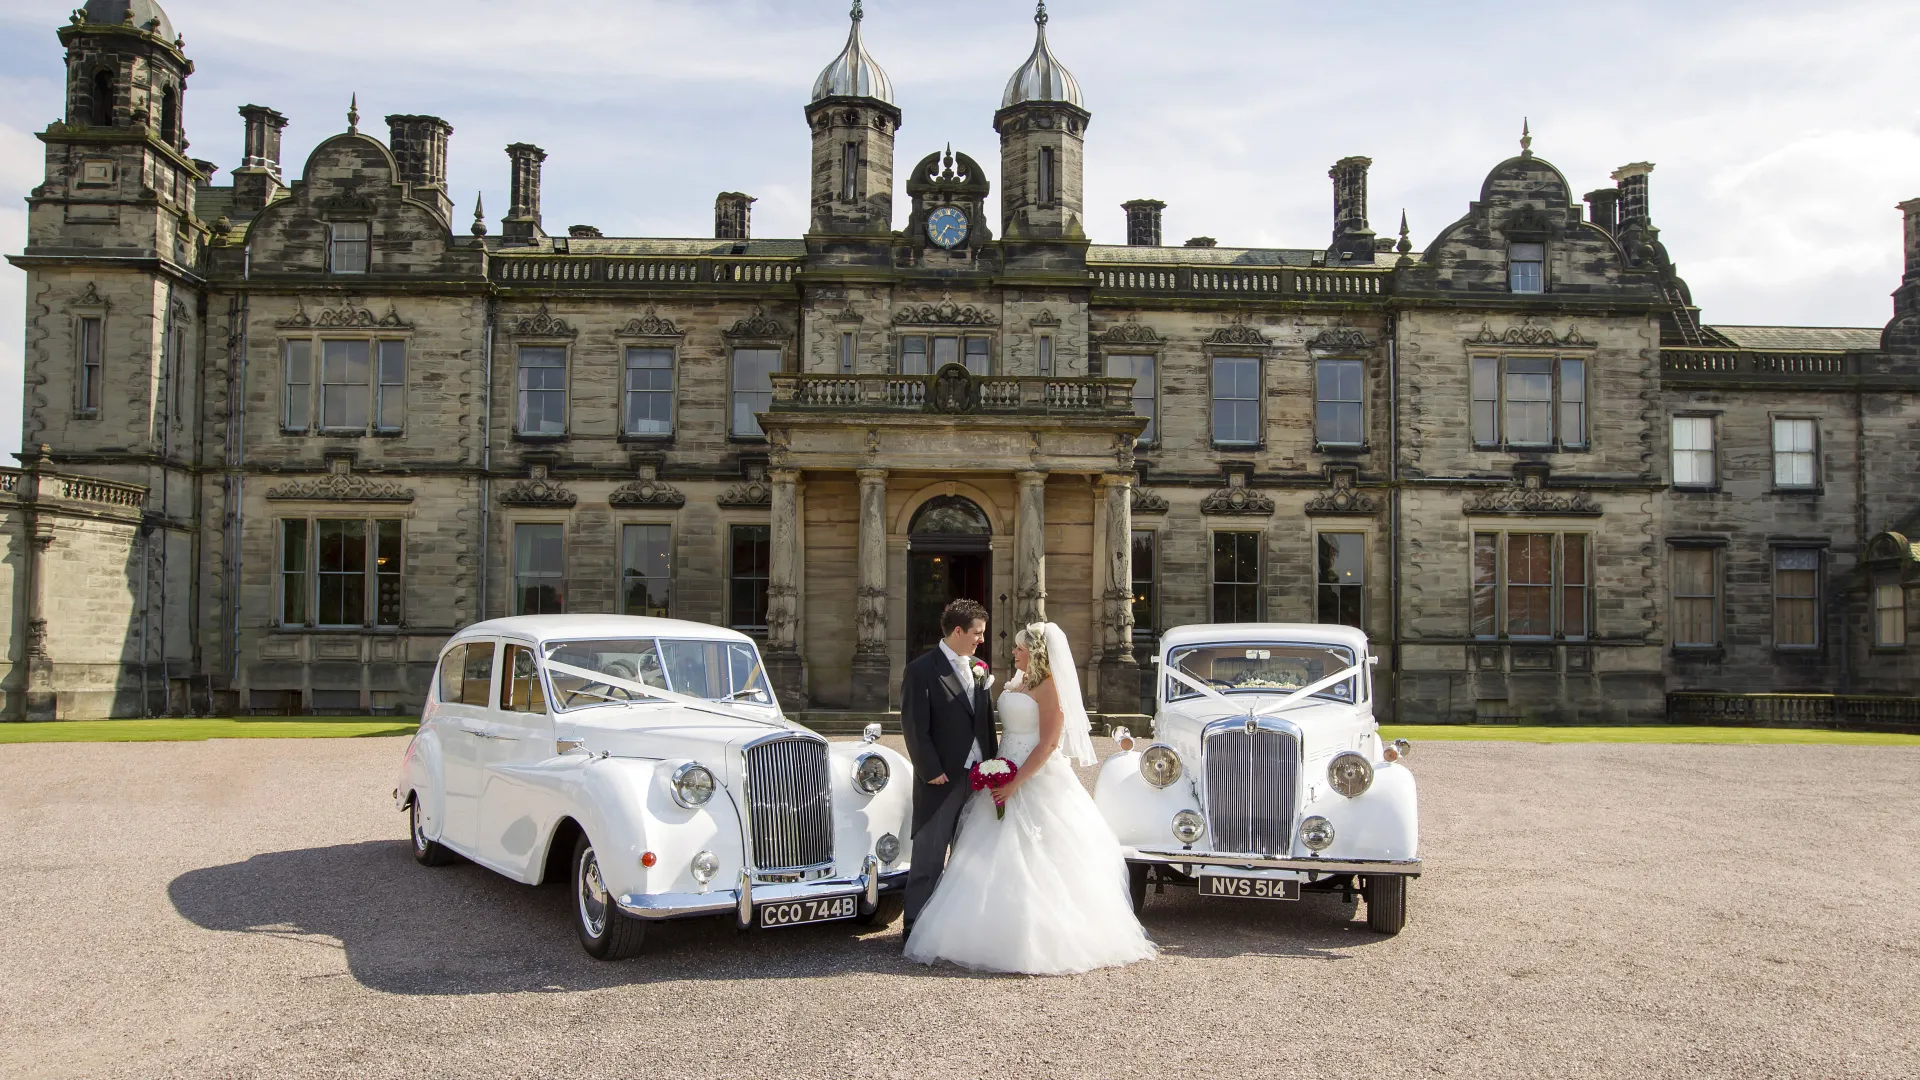 Two Classic Austin Limosuine decorated with matching Wedding Ribbons with bride and groom standing in the middle of the two vehicles